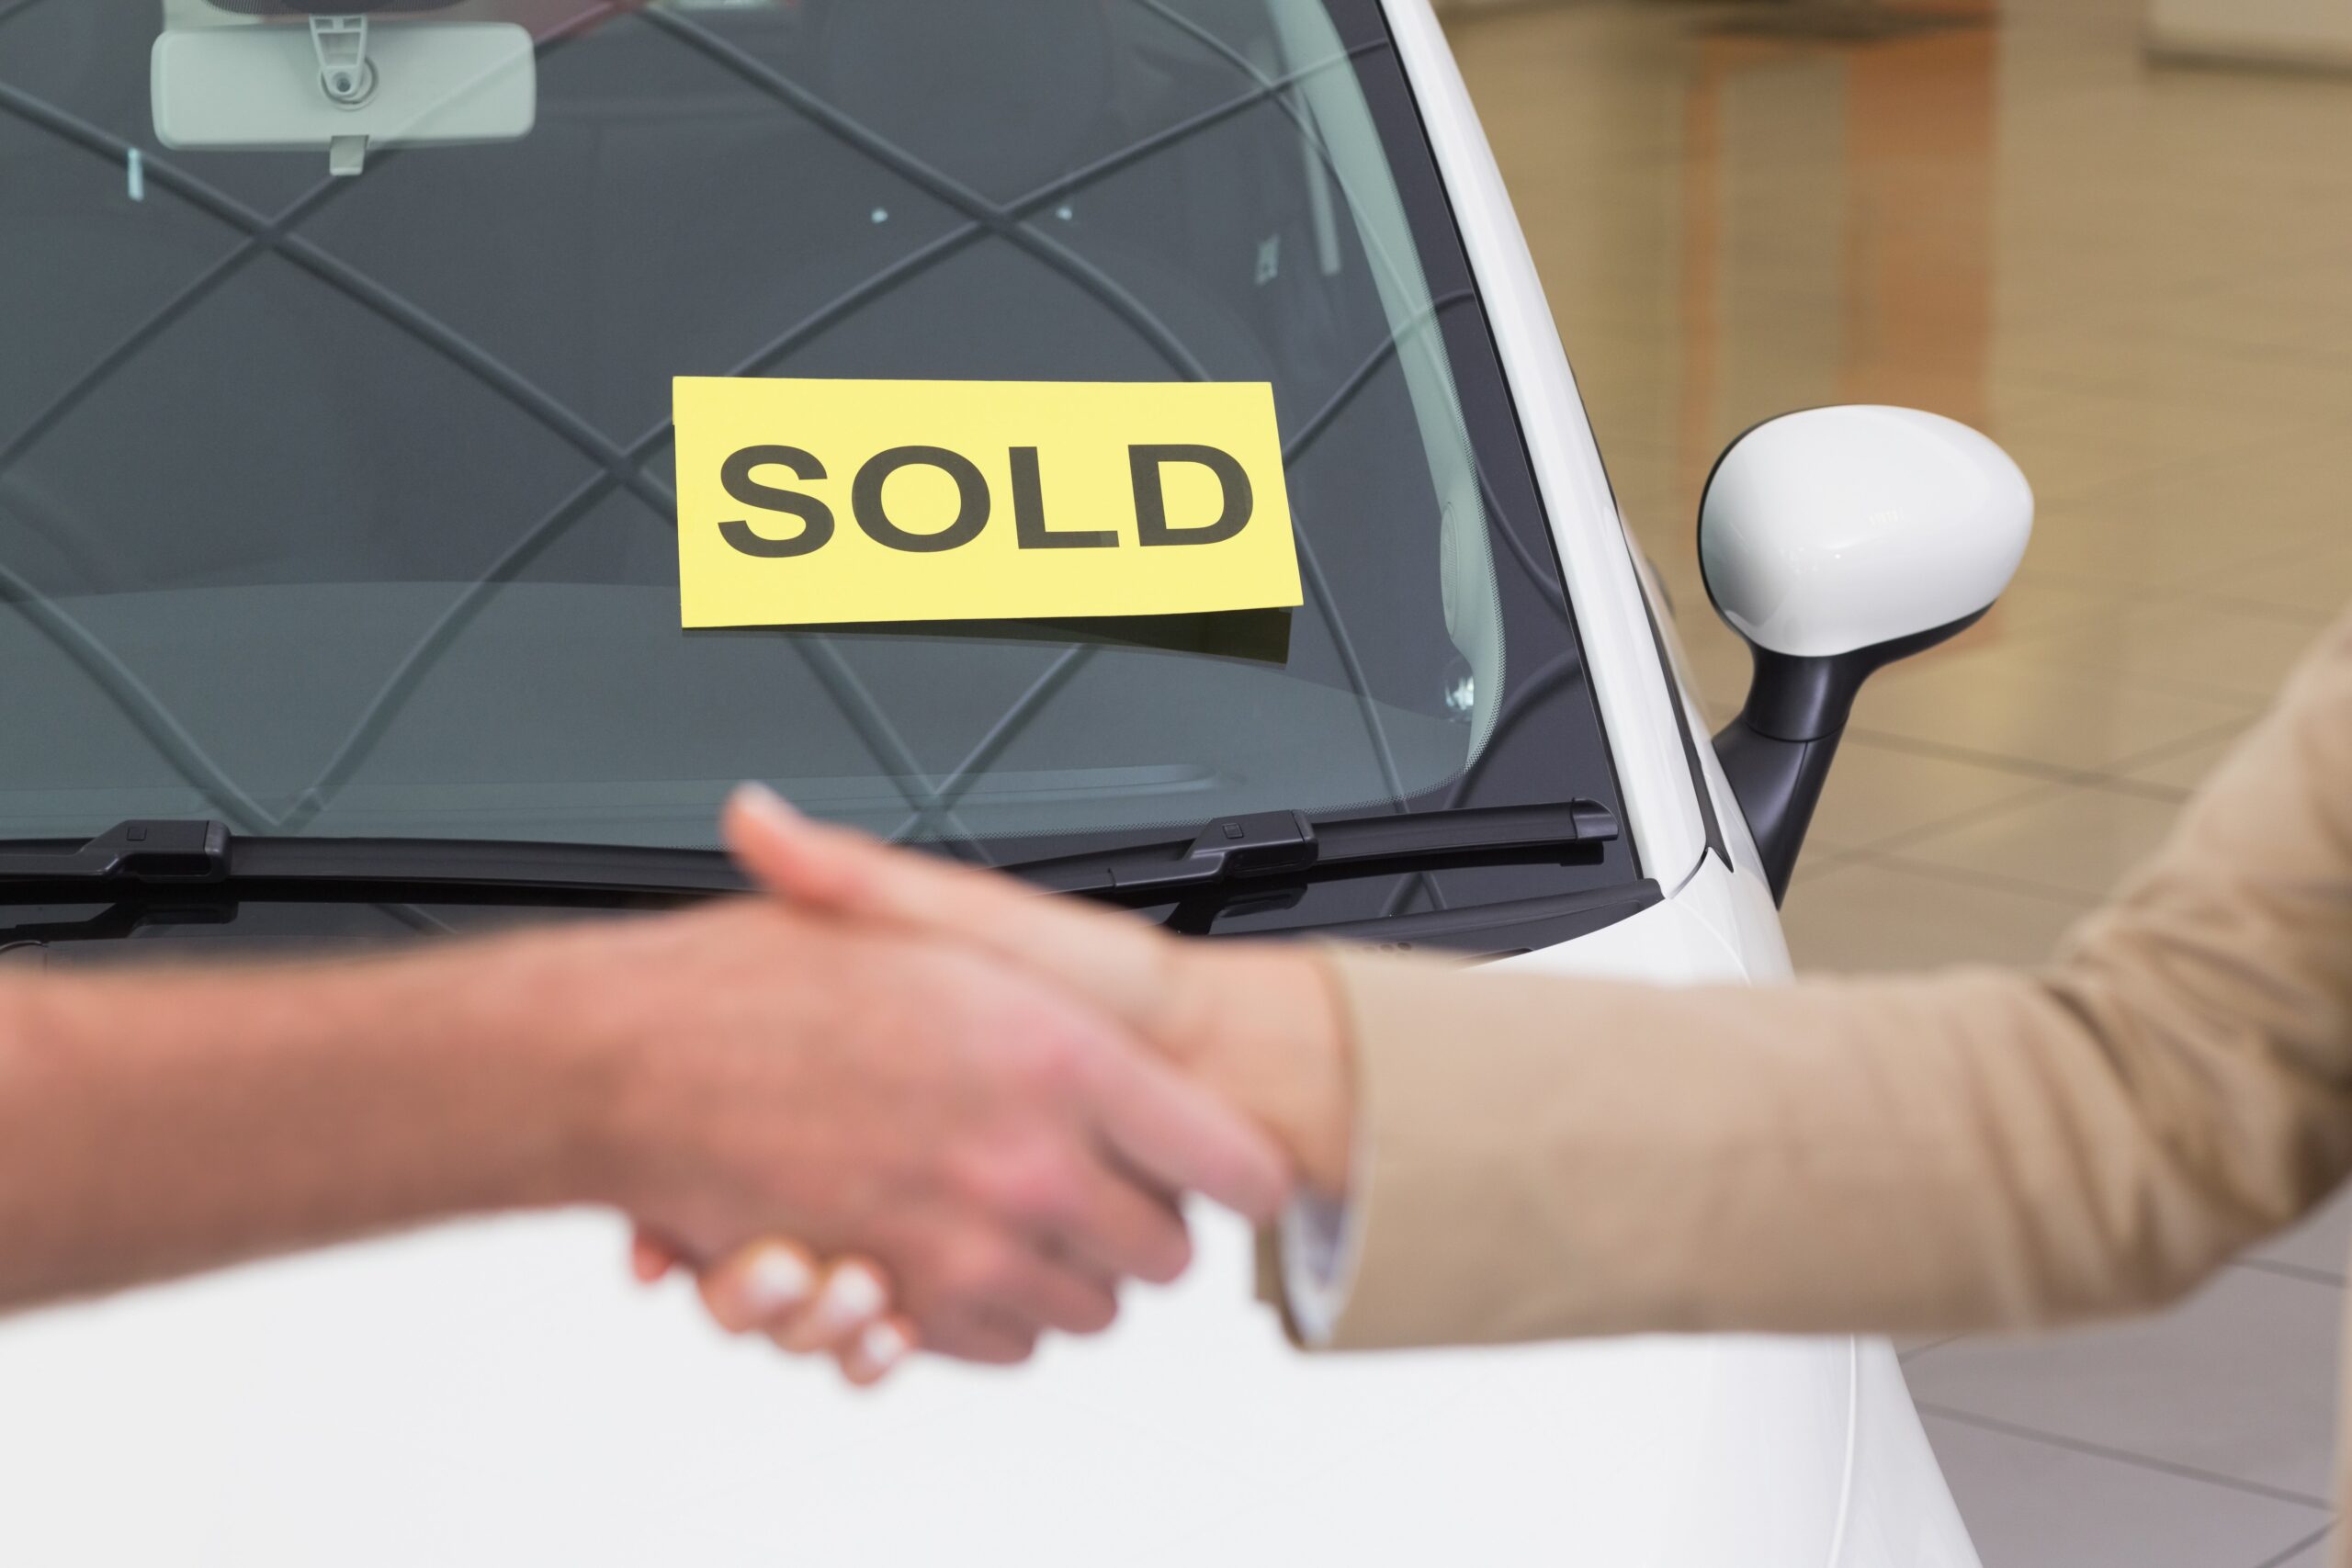 Two People Handshaking In Front Of Vehicle With Sold Sign On Windshield